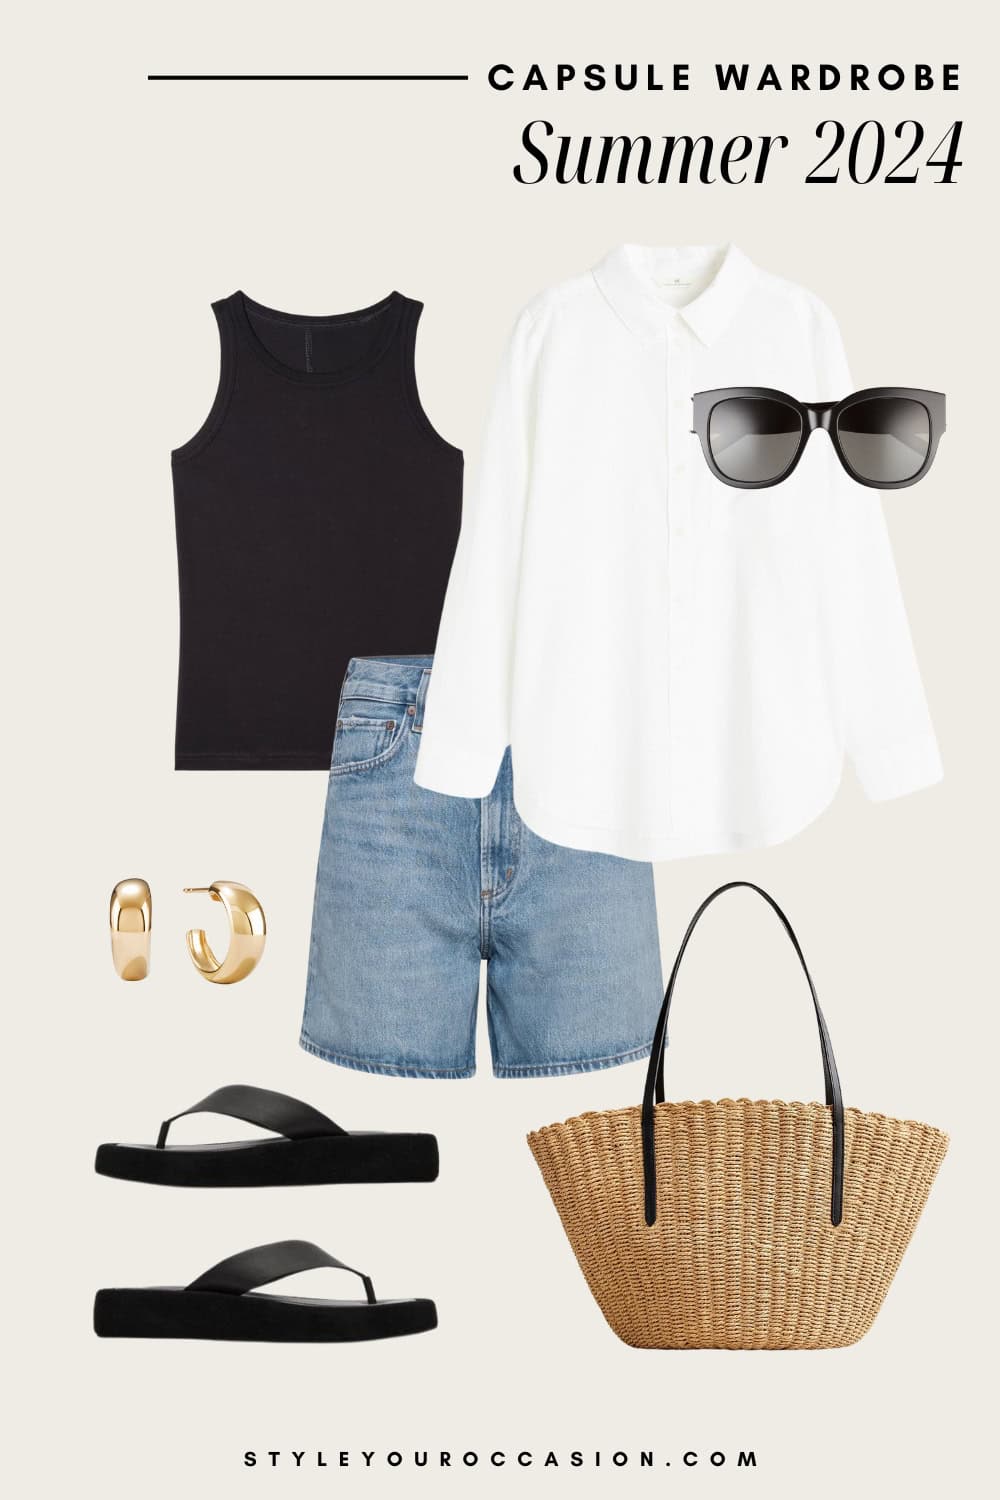 outfit graphic with denim shorts, a black tank top, white button-up shirt, straw tote, and chunky black sandals for a summer capsule wardrobe